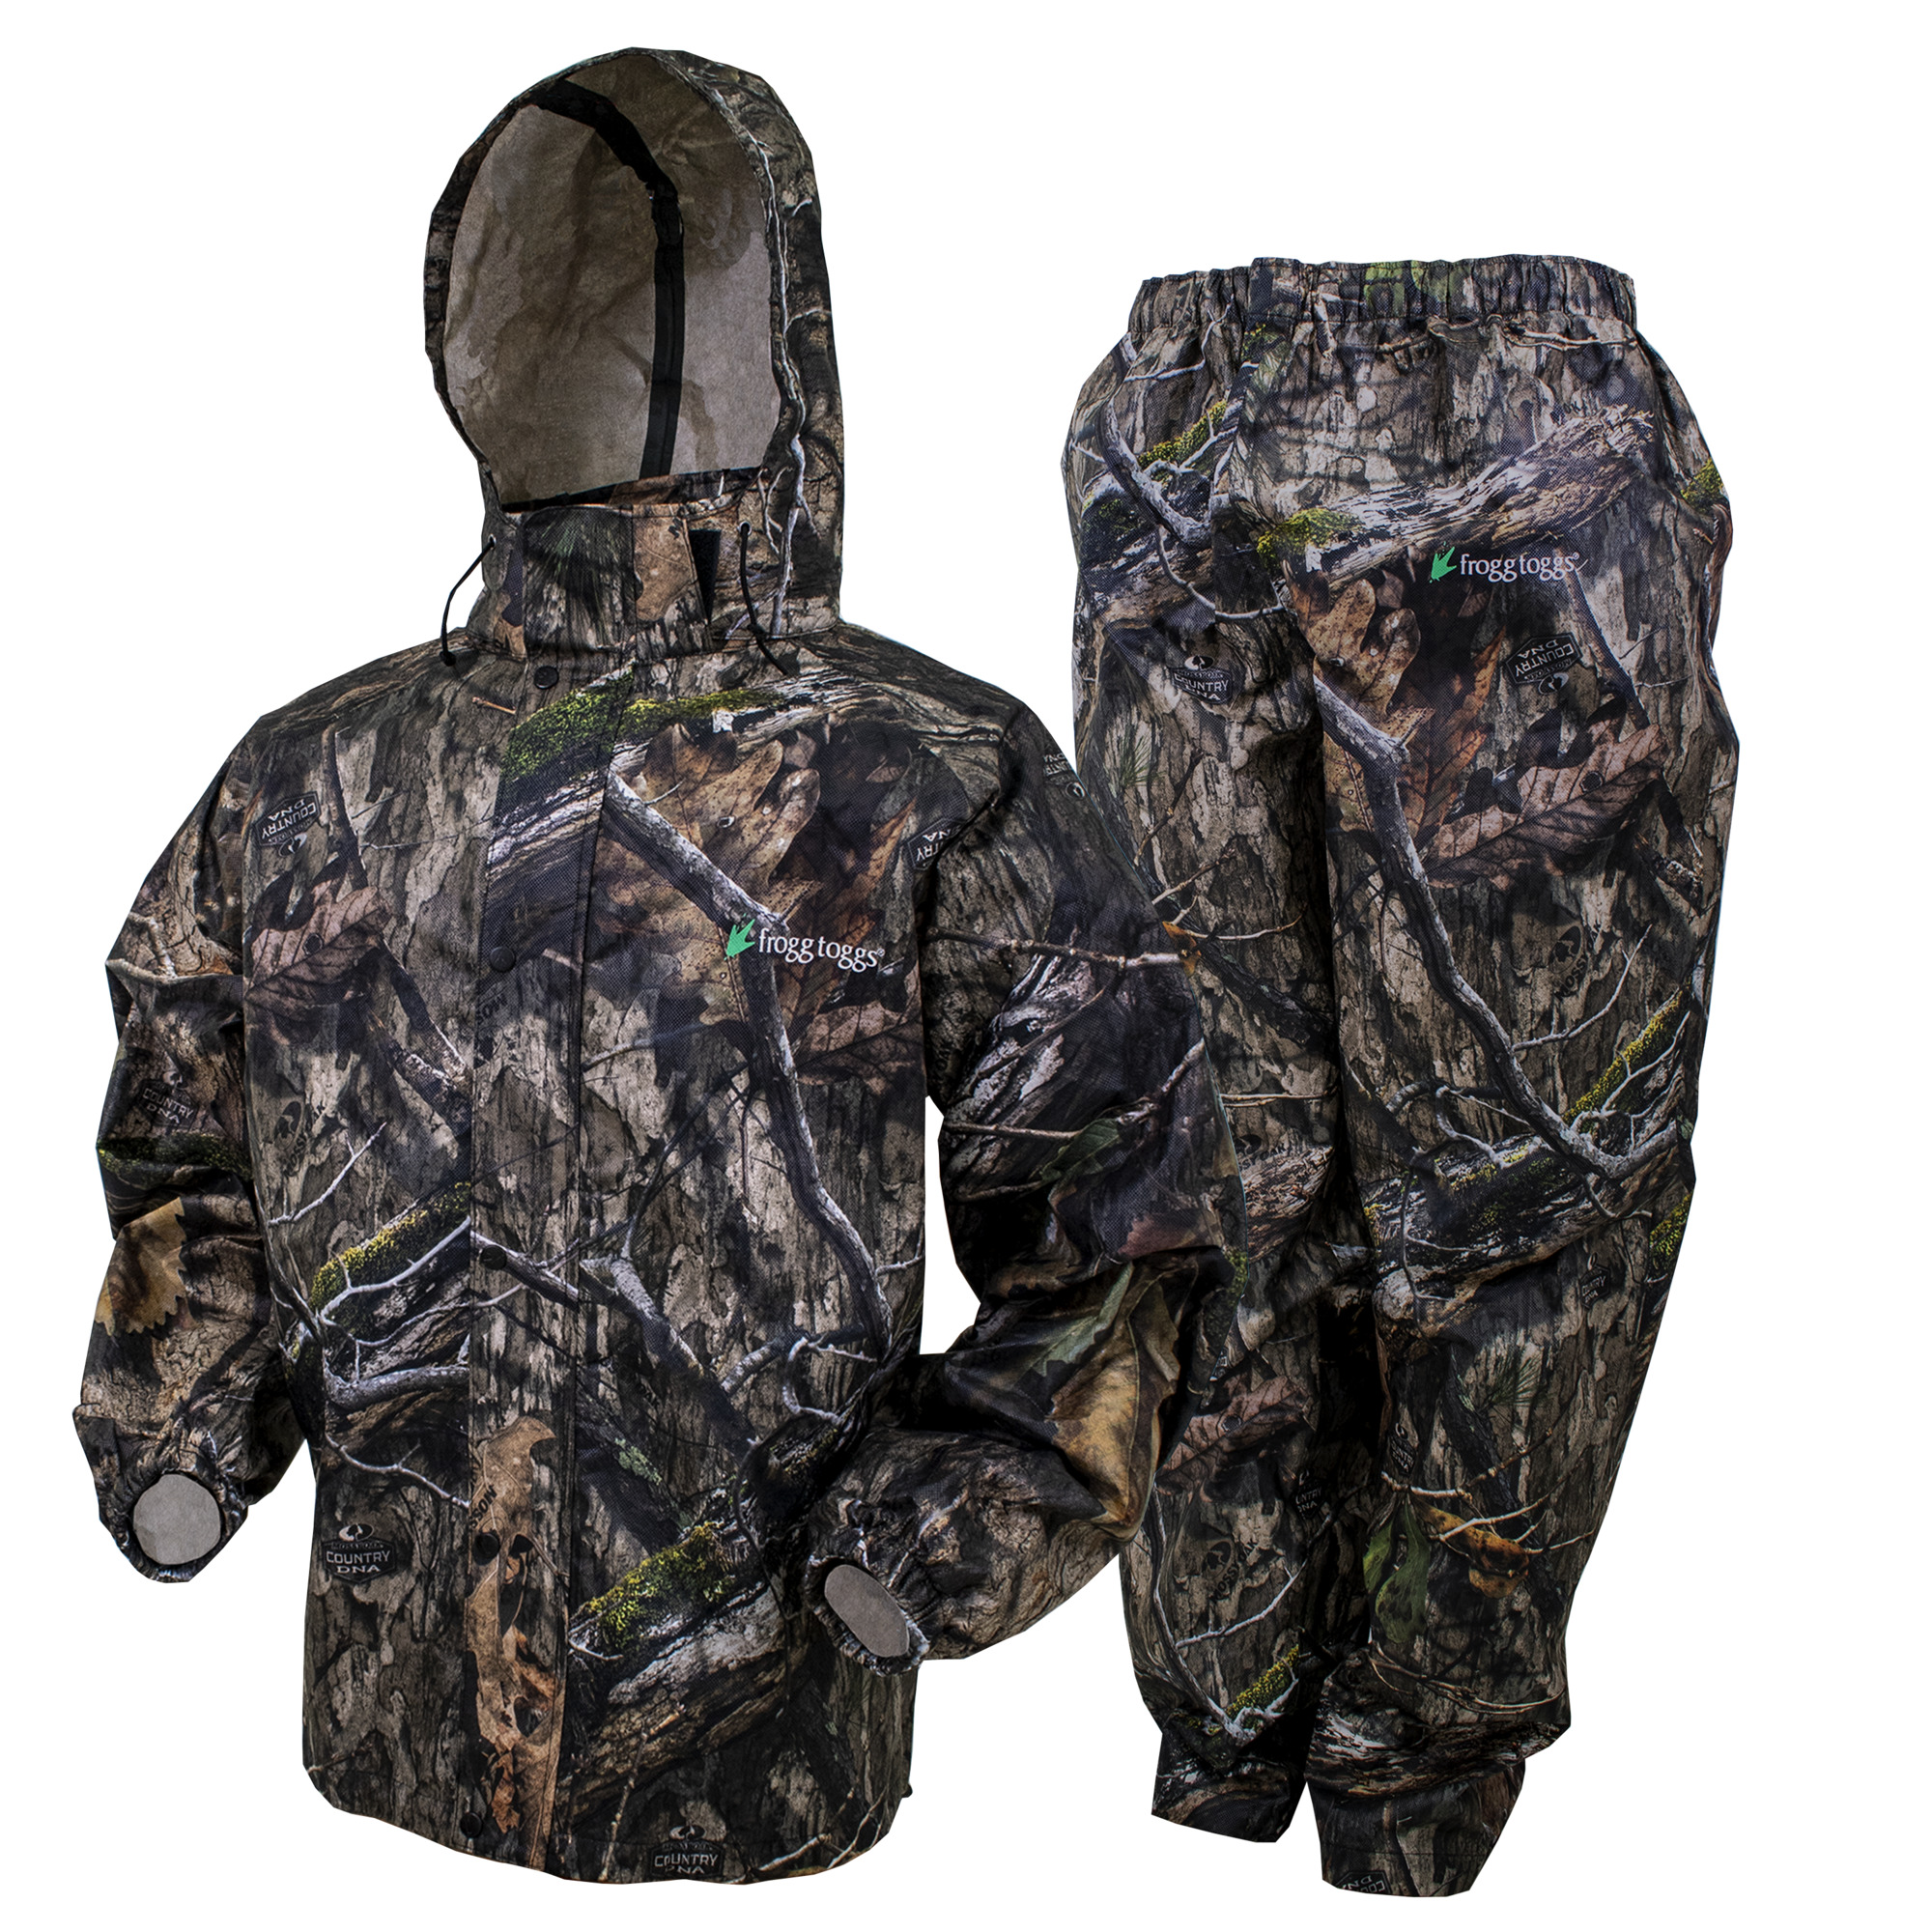 frogg toggs, Men's Classic All-Sport Suit, Size 3XL, Color Mossy Oak DNA, Model AS1310-8273X